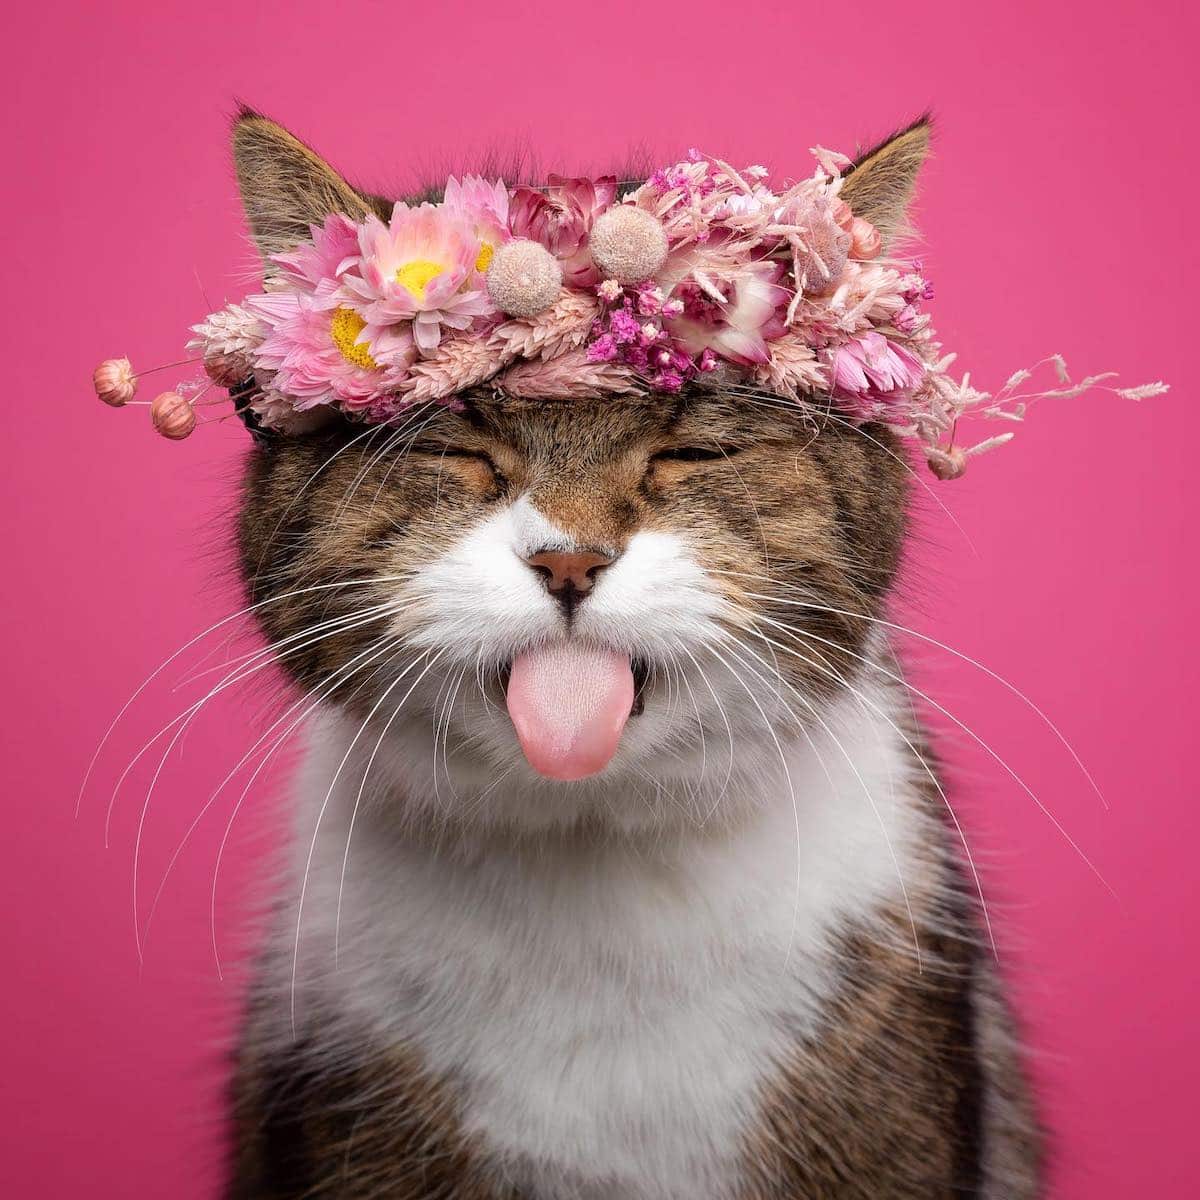 Cat Photography Shows the Varied Purrsonalities of Furry Friends